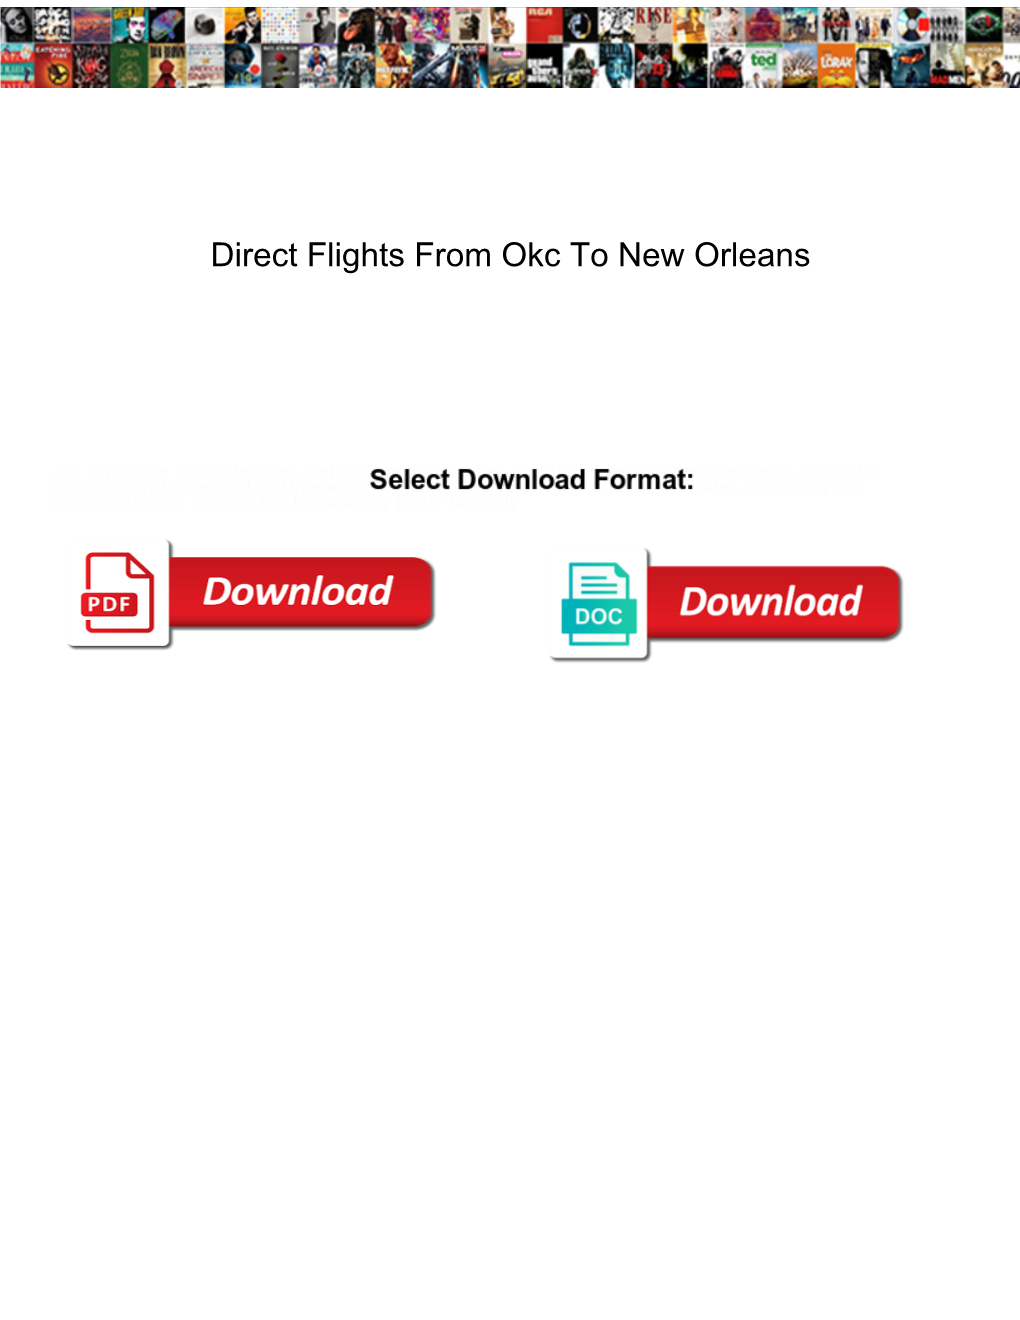 Direct Flights from Okc to New Orleans